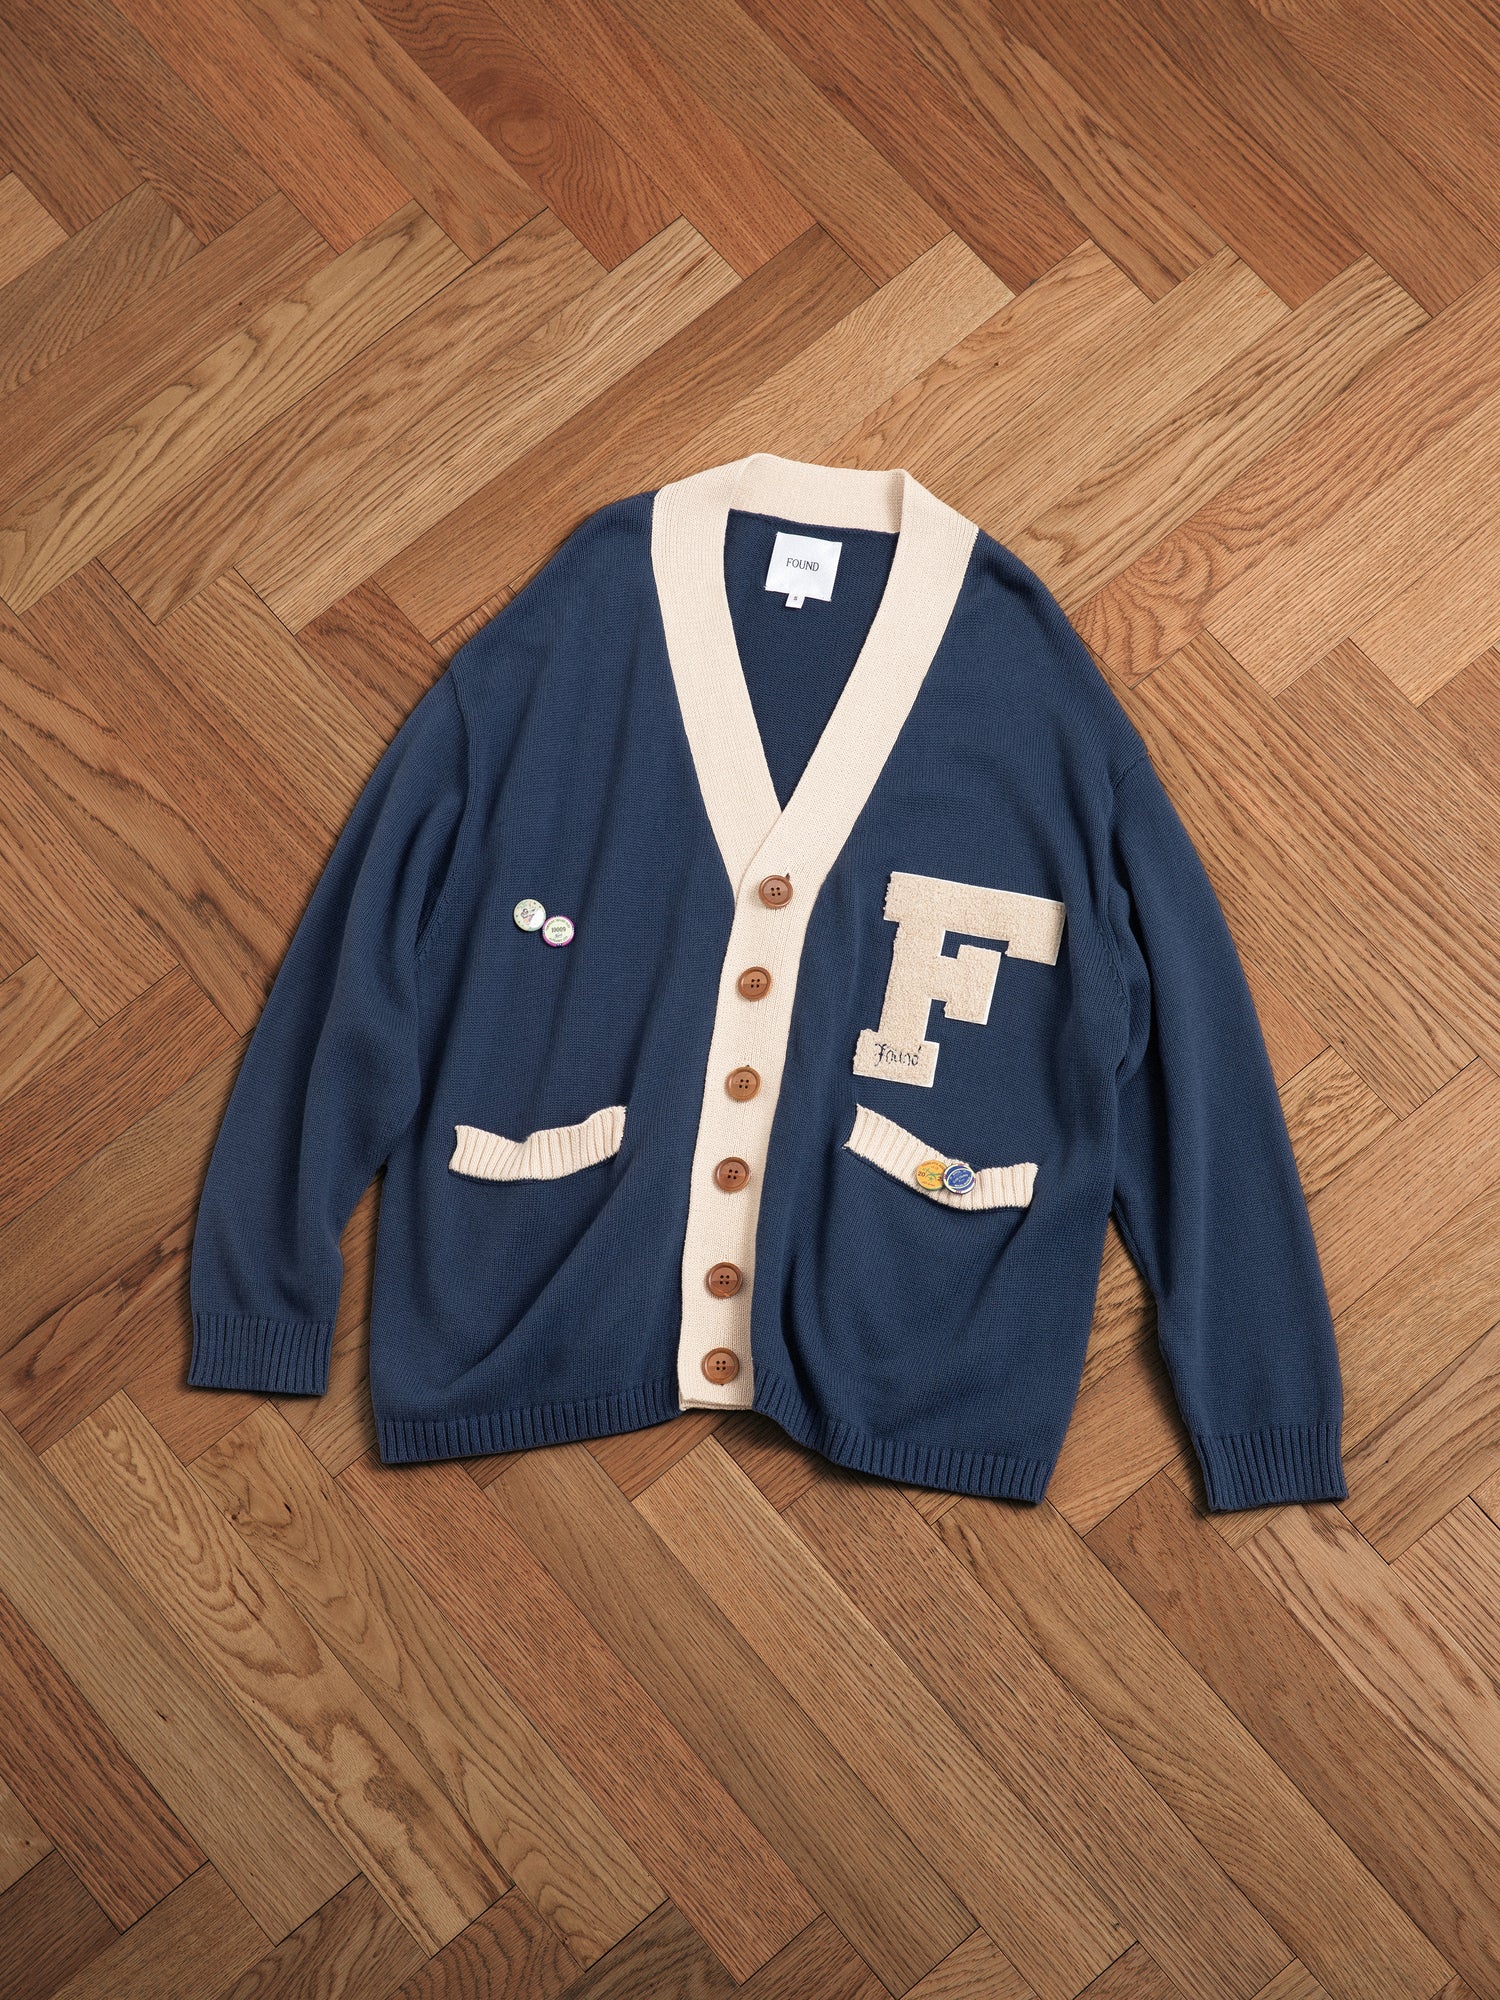 A blue and white Found Varsity Contrast Cardigan sitting on a wooden floor.